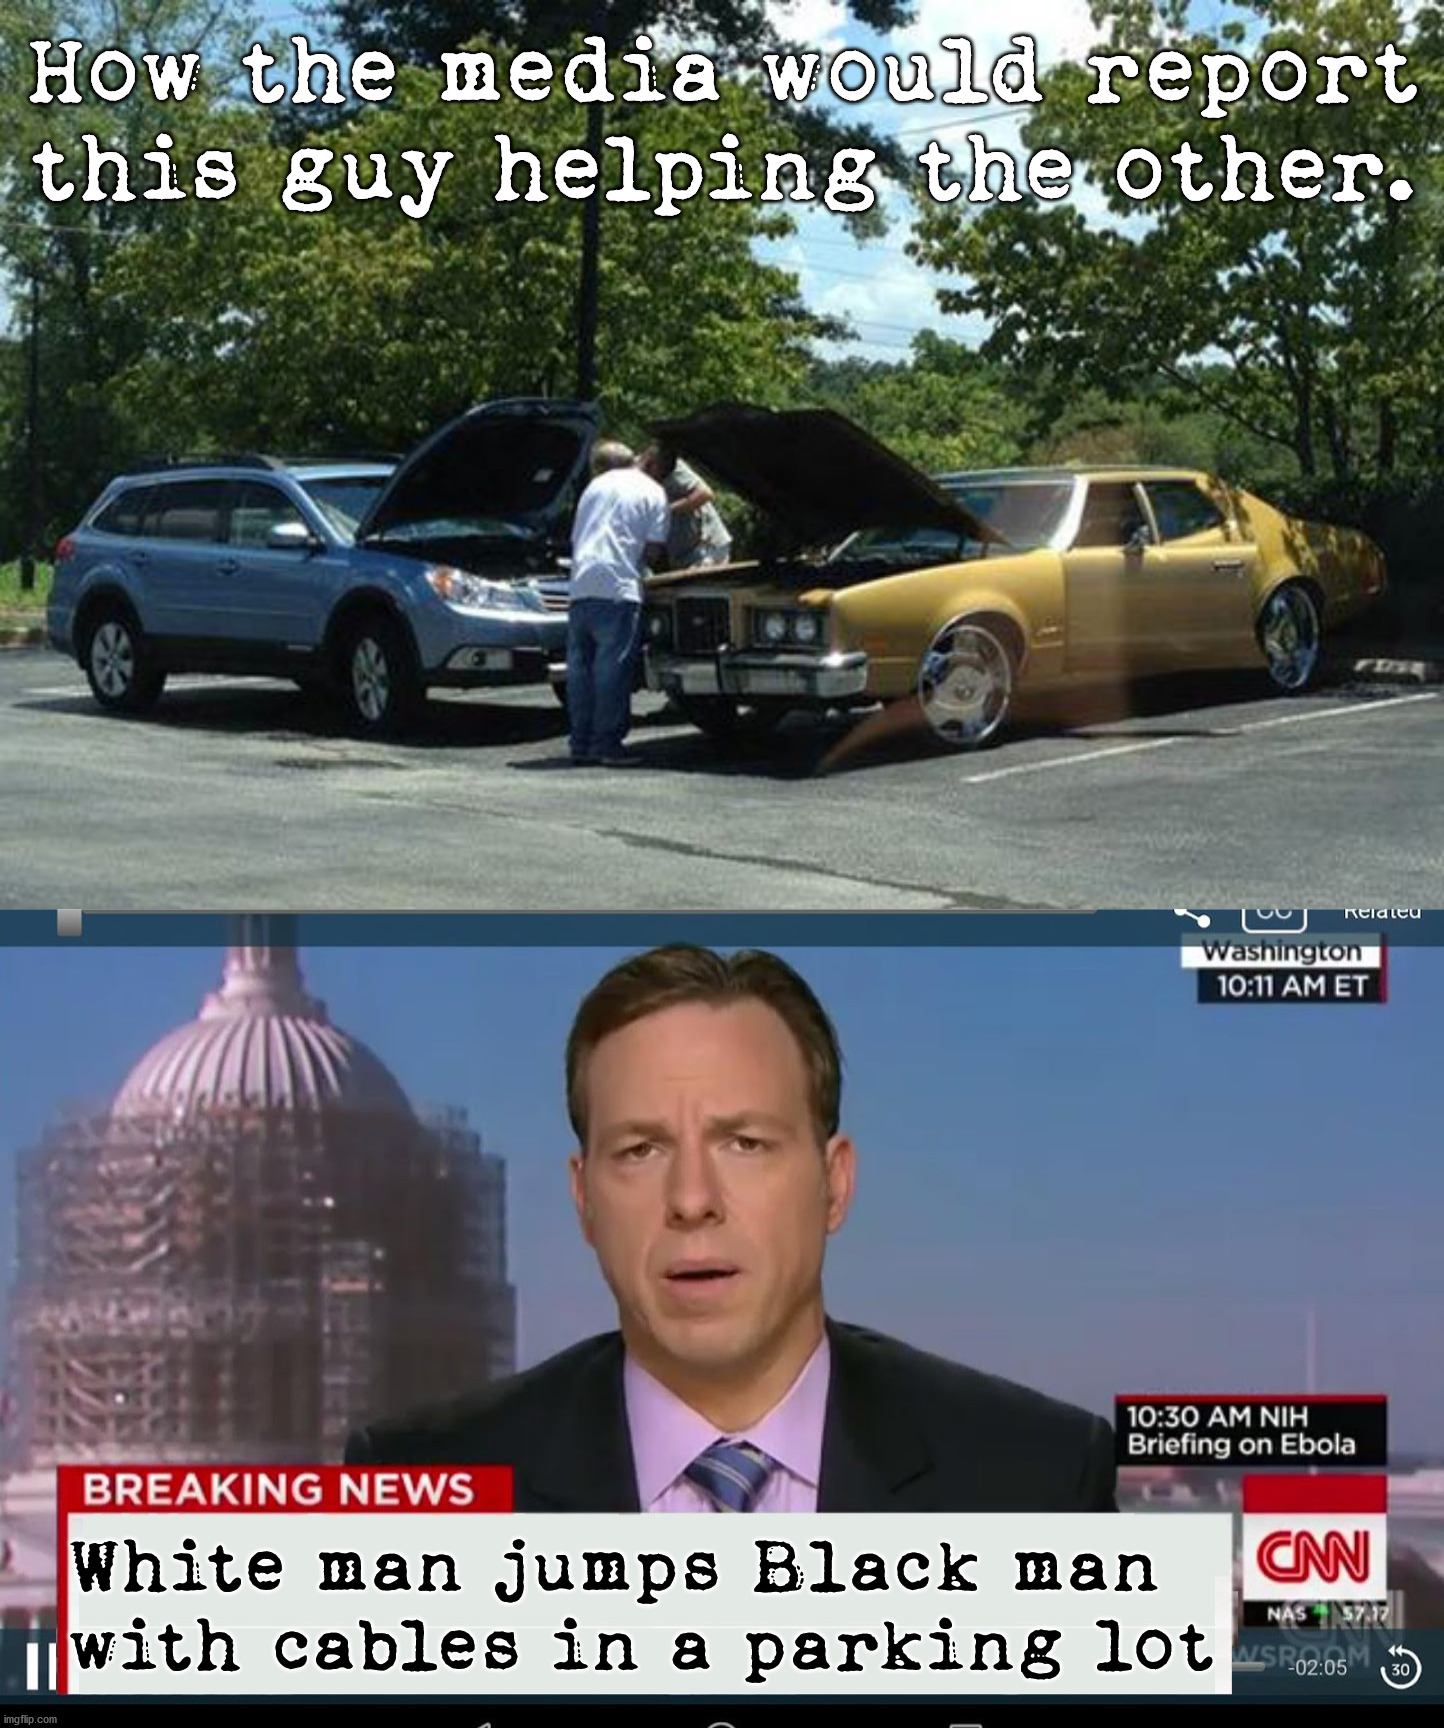 Always twisting news to make others look bad. | How the media would report this guy helping the other. White man jumps Black man with cables in a parking lot | image tagged in cnn breaking news template,fake news,media lies | made w/ Imgflip meme maker